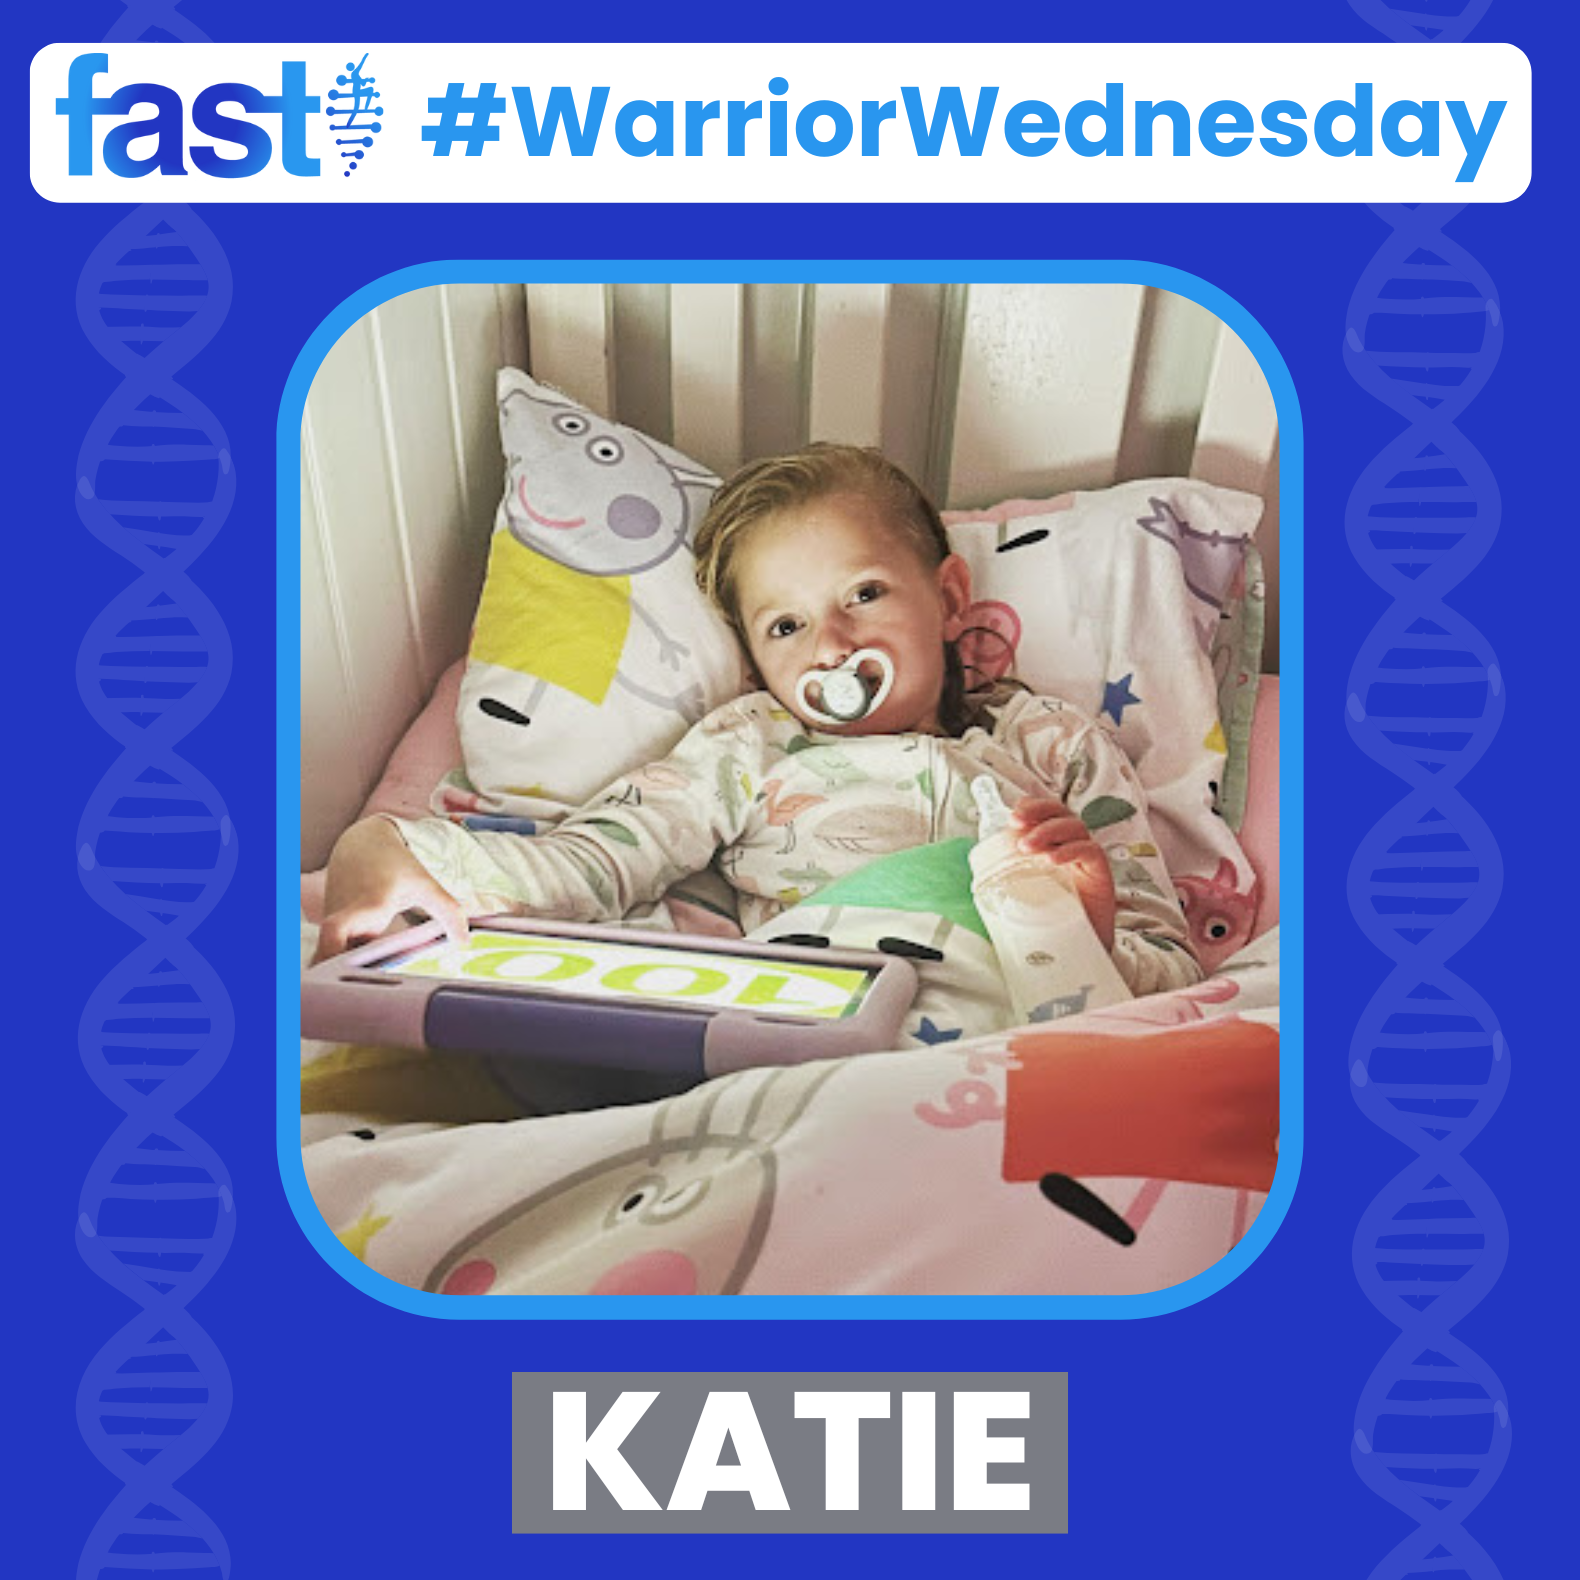 Warrior Wednesday: Katie, with Katie lying in her bed looking at the camera